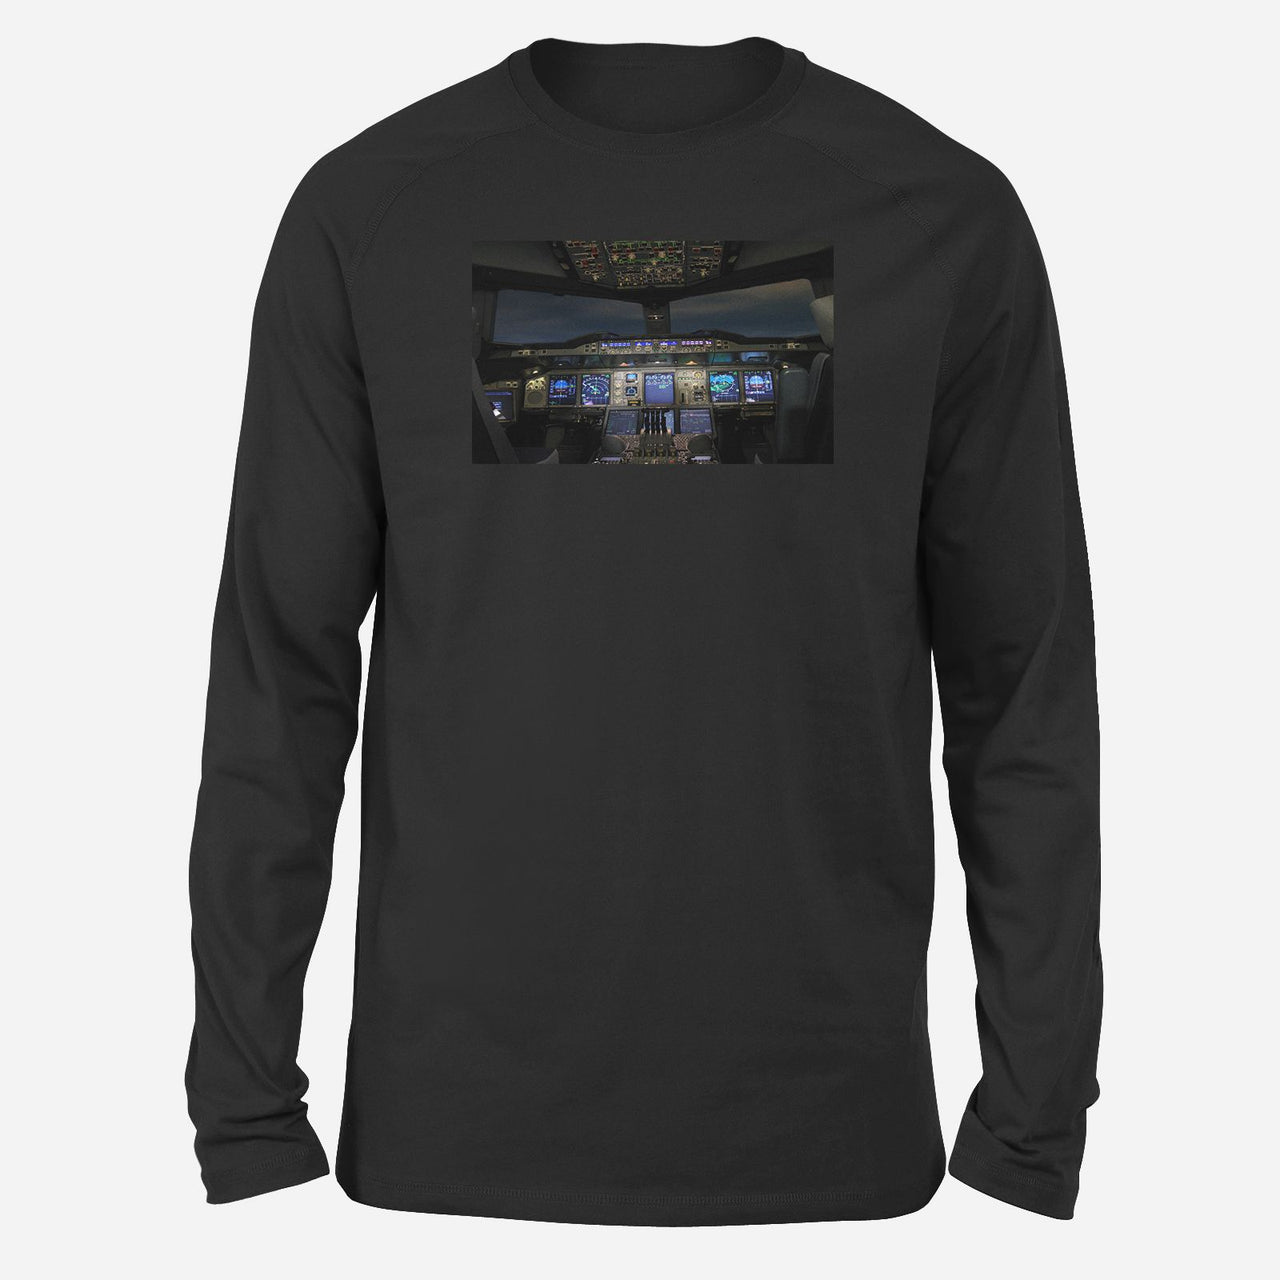 Airbus A380 Cockpit Designed Long-Sleeve T-Shirts